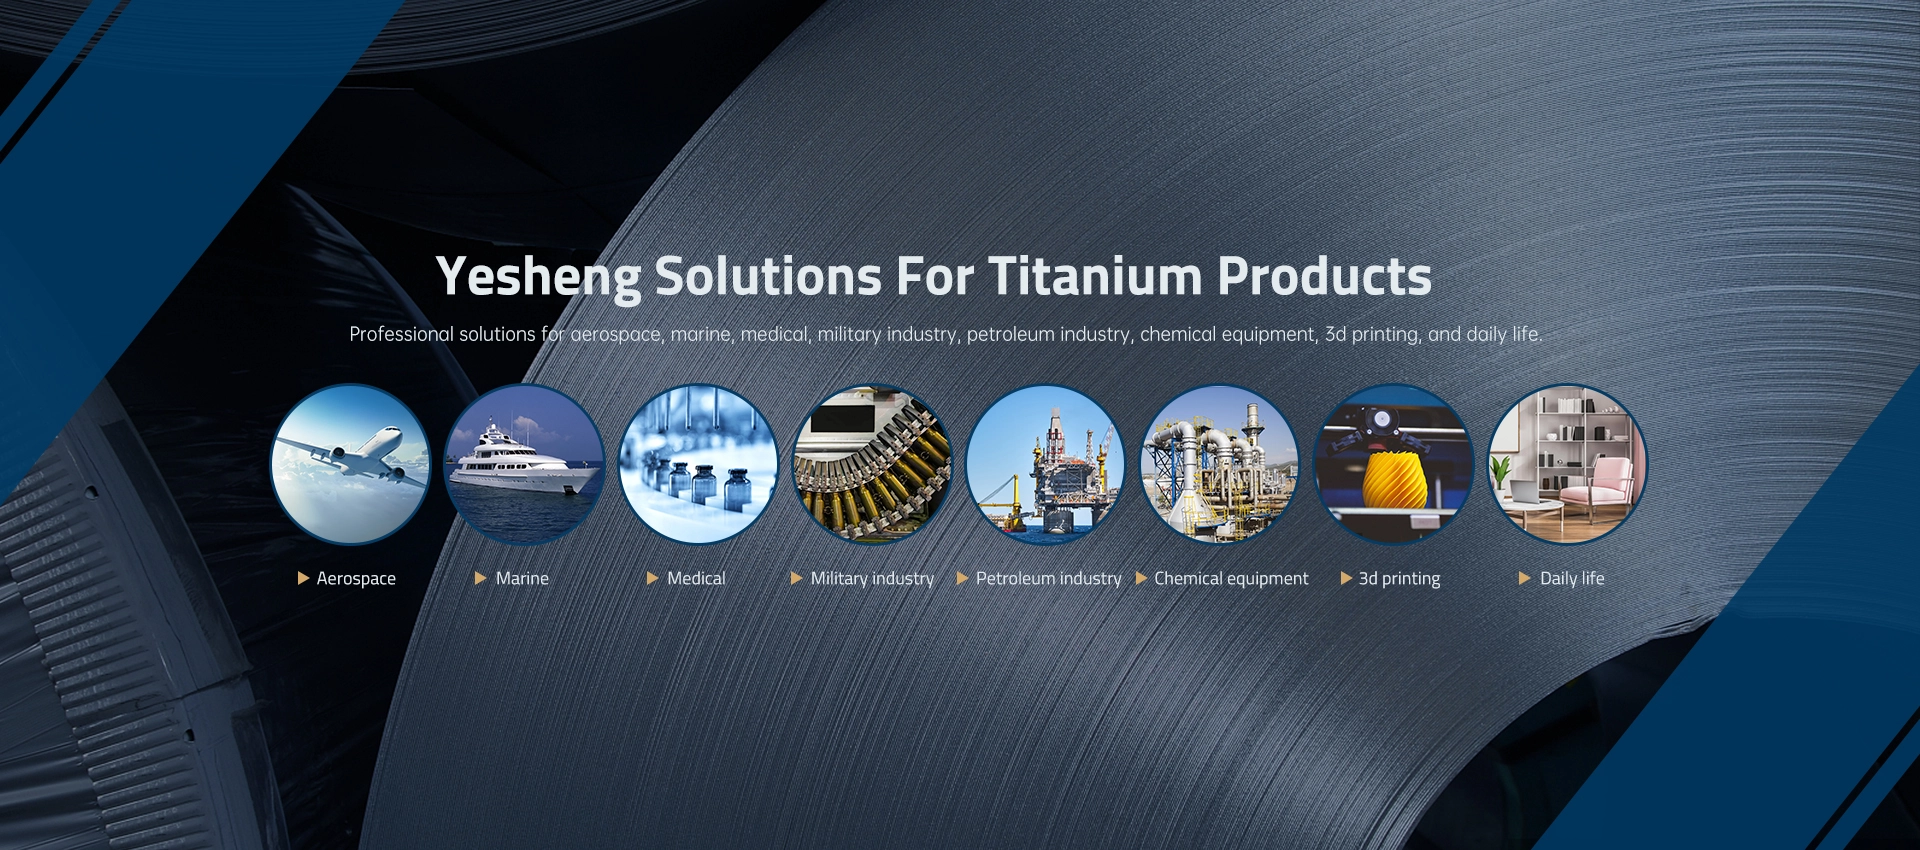 Yesheng Solutions For Titanium Products